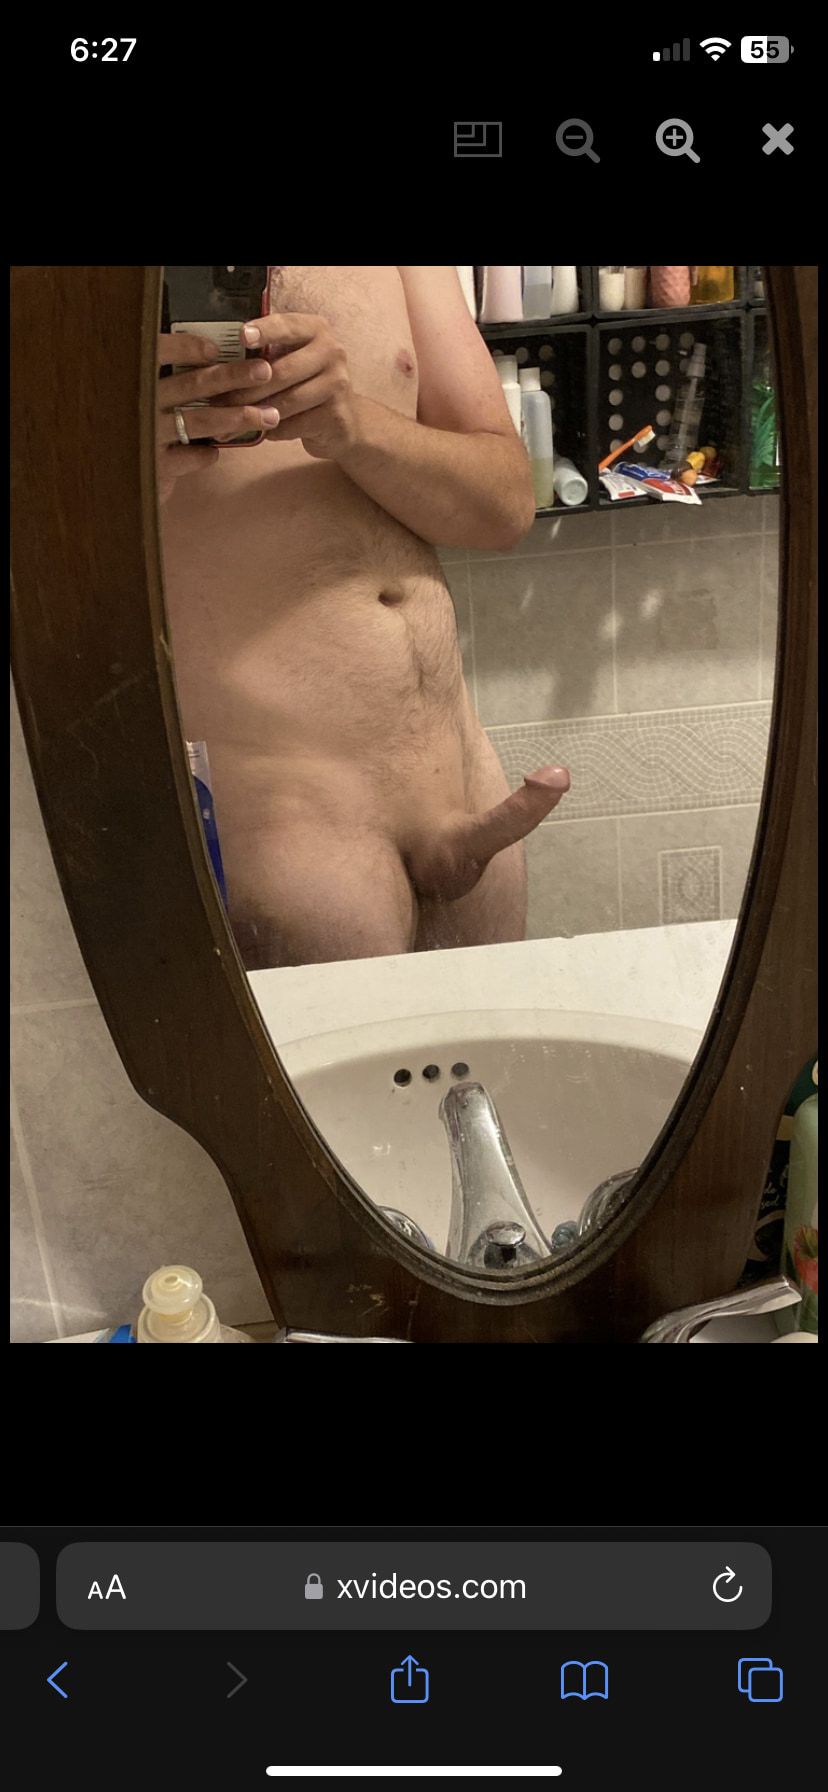 My thick cock